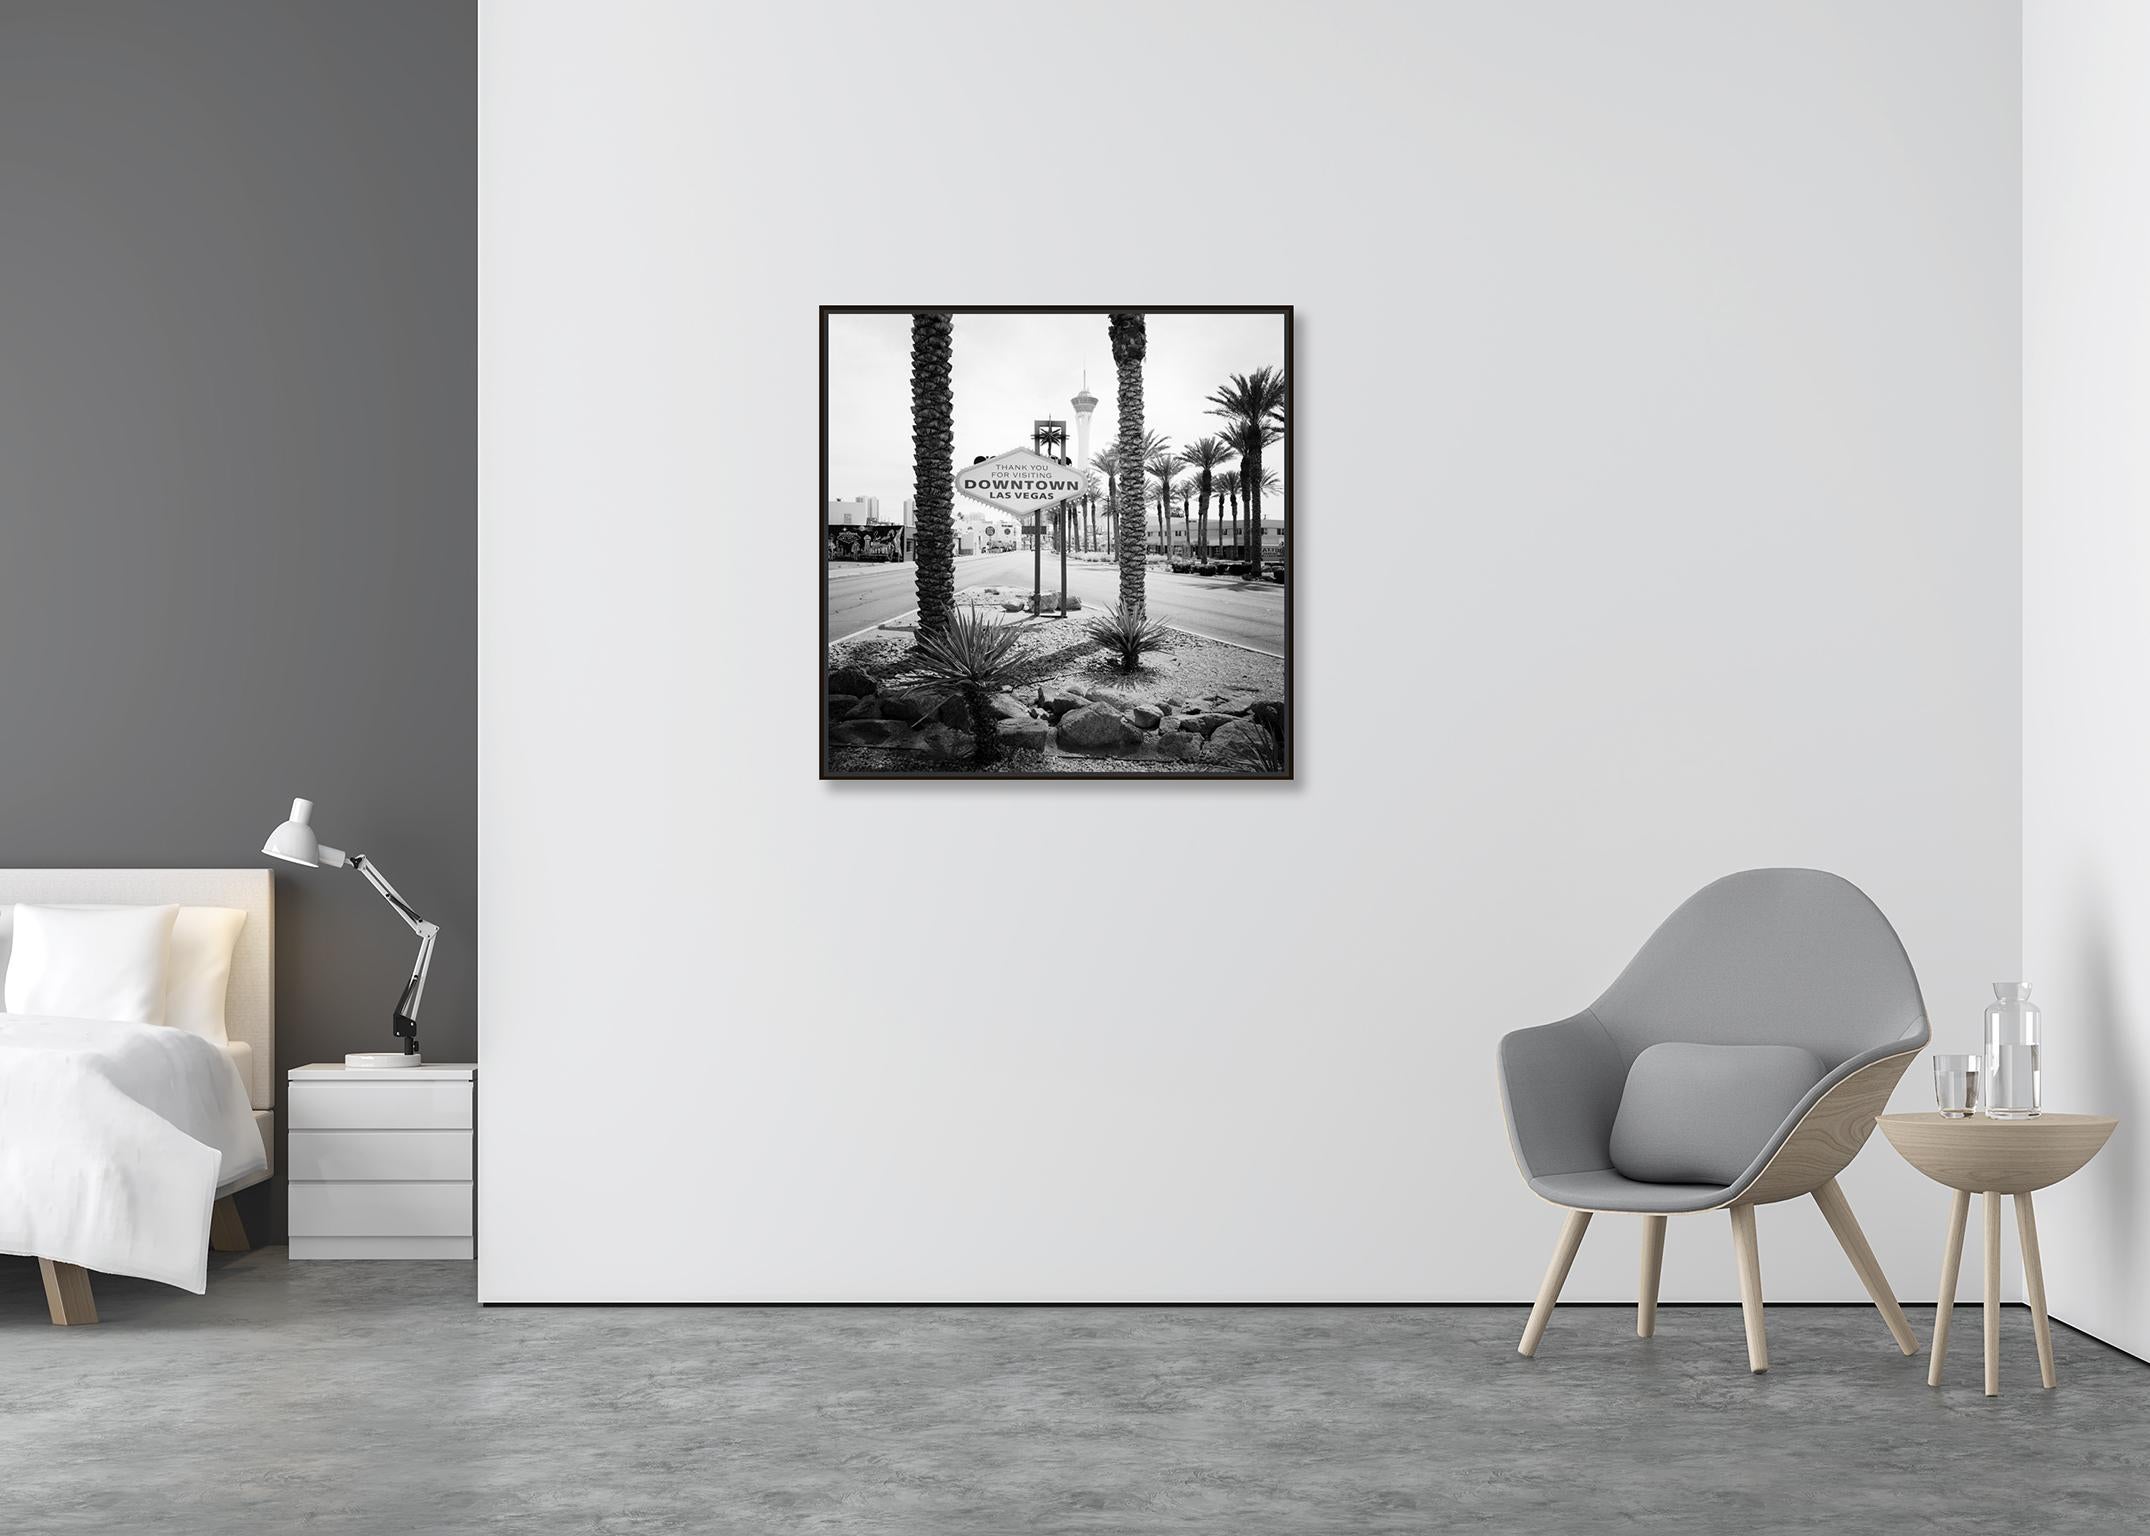 Gerald Berghammer - Limited edition of 9.
Archival fine art pigment print. Signed, titled, dated and numbered by artist. Certificate of authenticity included. Printed with 4cm white border.
40 x 40 cm / 15.7 x 15.7 in - edition of 9
60 x 60 cm /